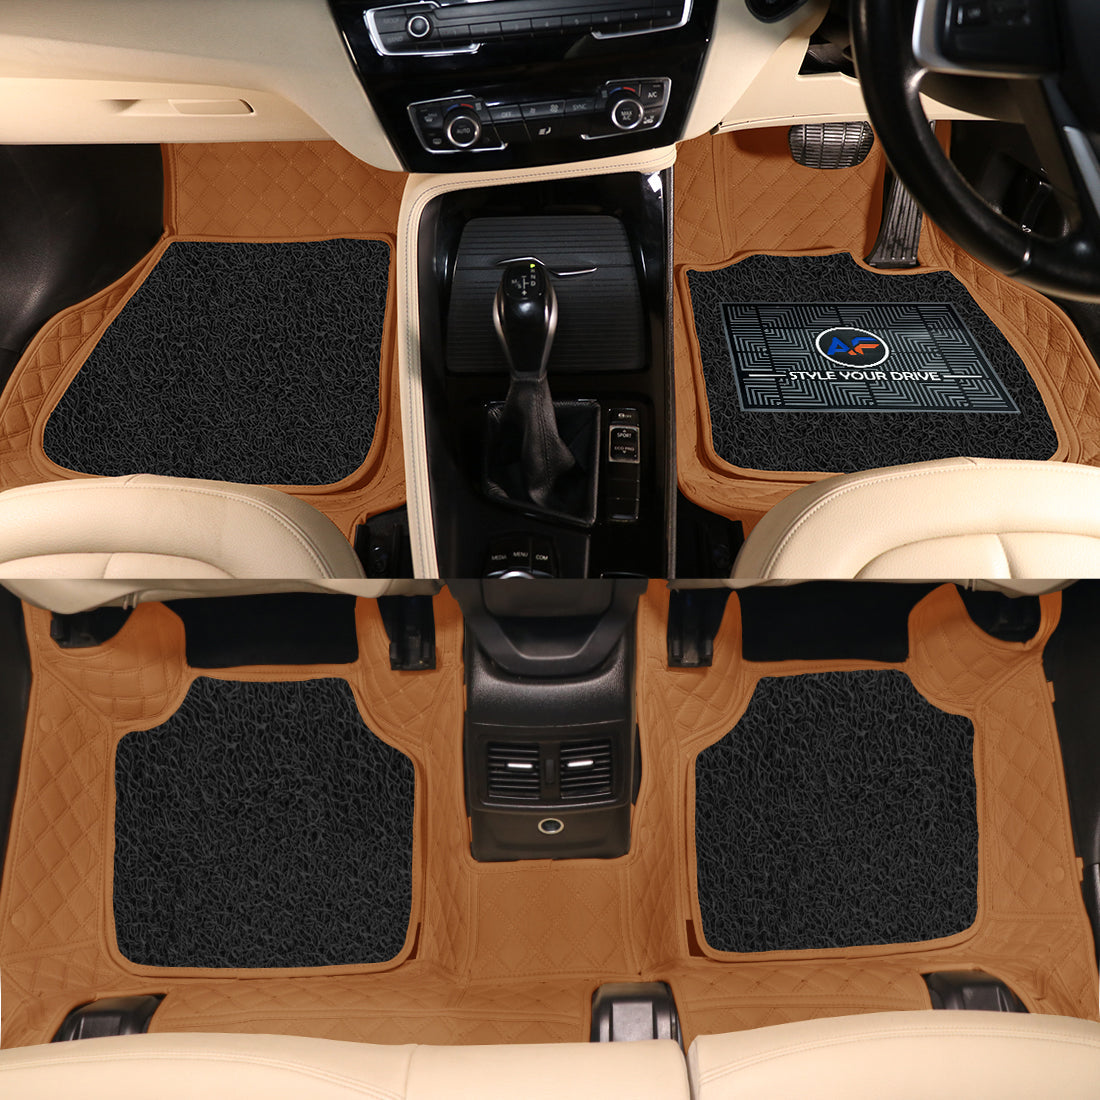 Toyota Fortuner 2015 7D Luxury Car Mat, All Weather Proof, Anti-Skid, 100% Waterproof & Odorless with Unique Diamond Fish Design (24mm Luxury PU Leather, 2 Rows)